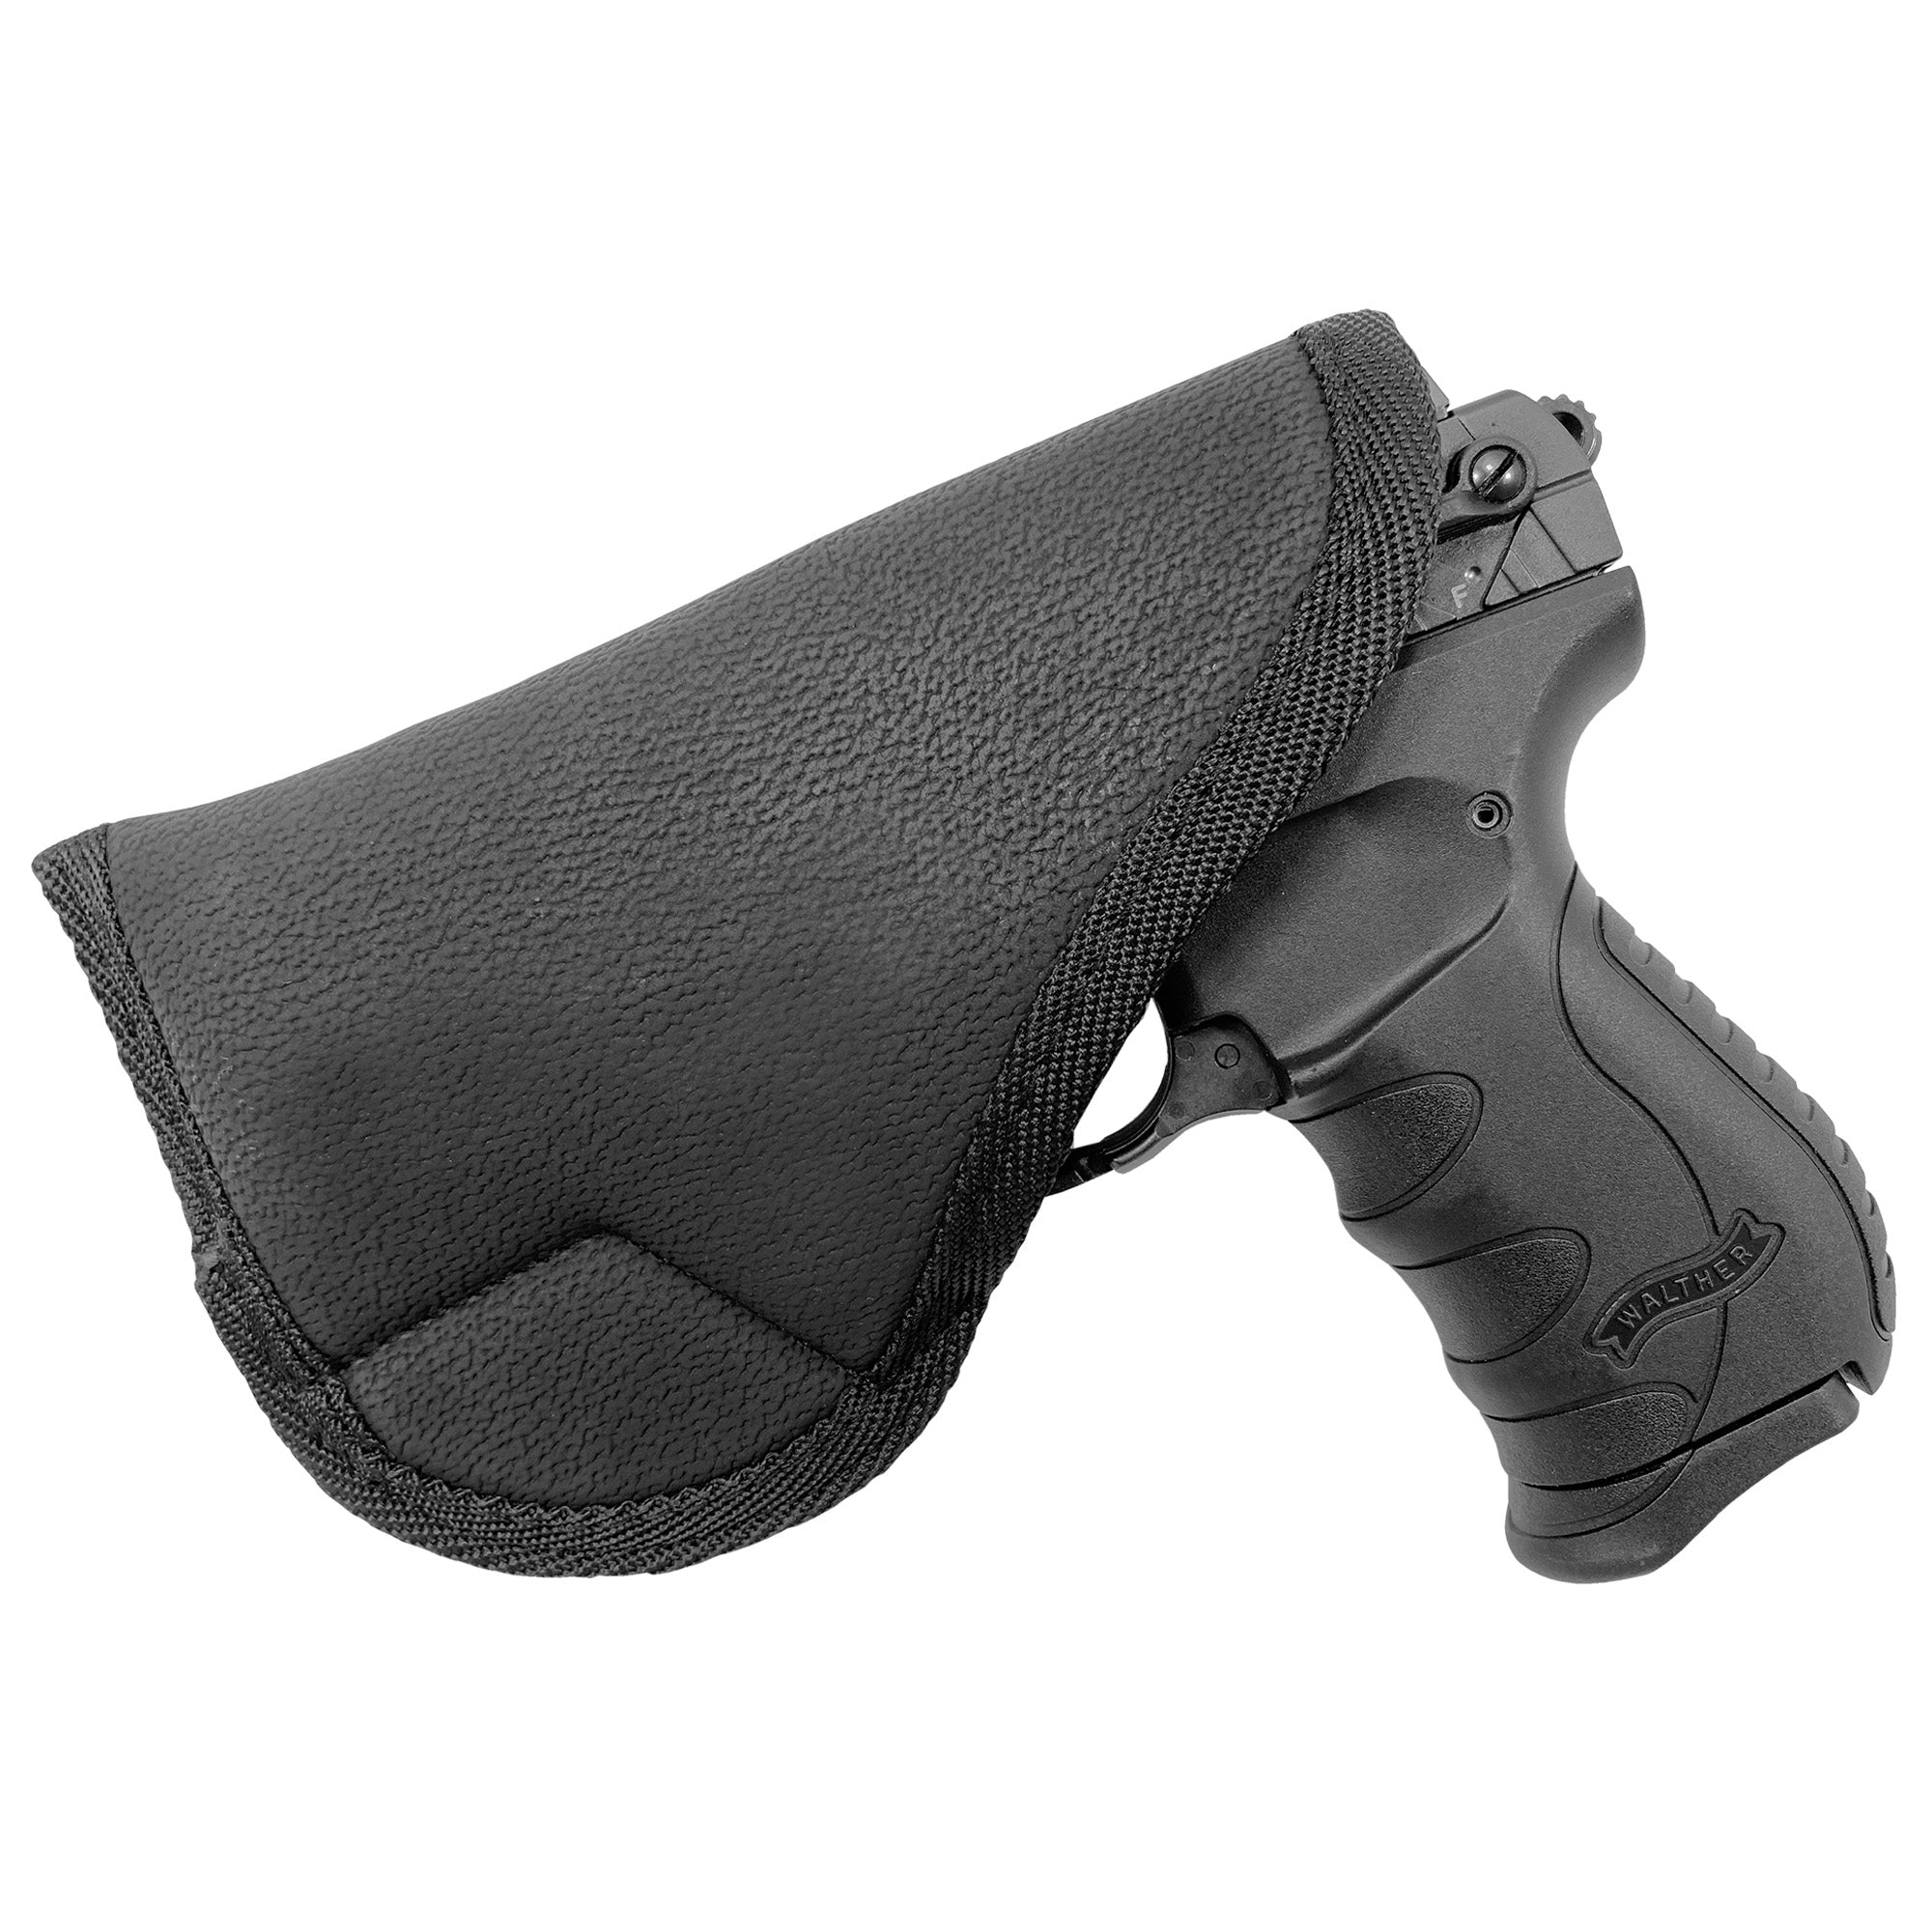 Body Grip Holster fits Single Stack Sub-Compacts Up to 3.6''